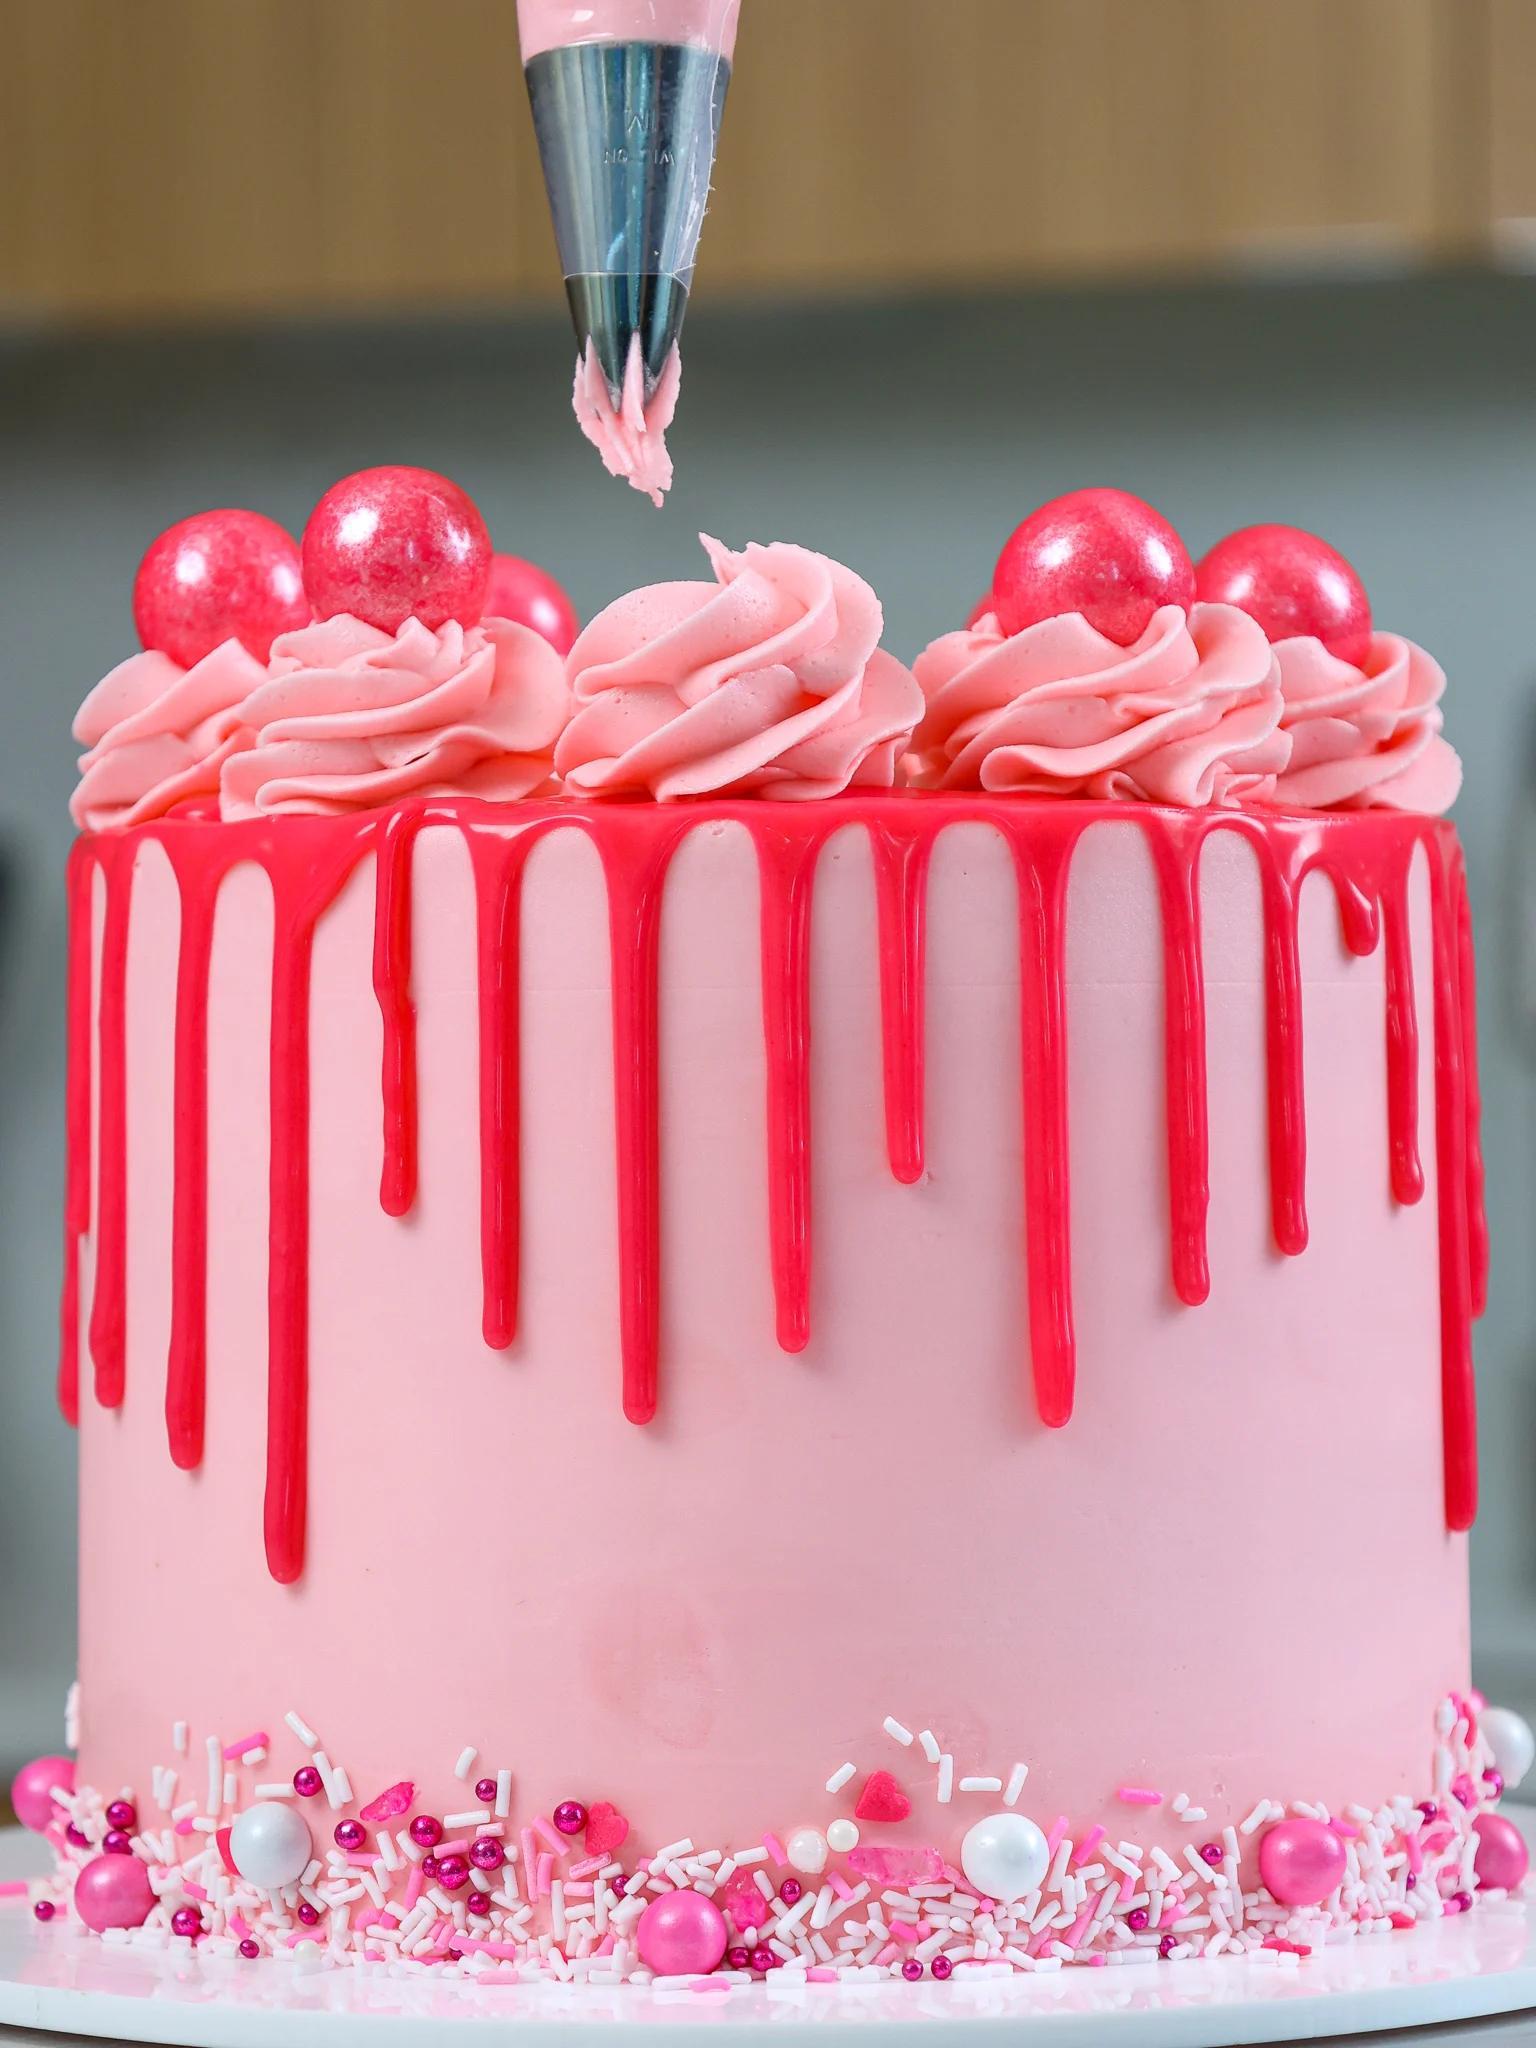 image of bubblegum frosting being piped onto a cake